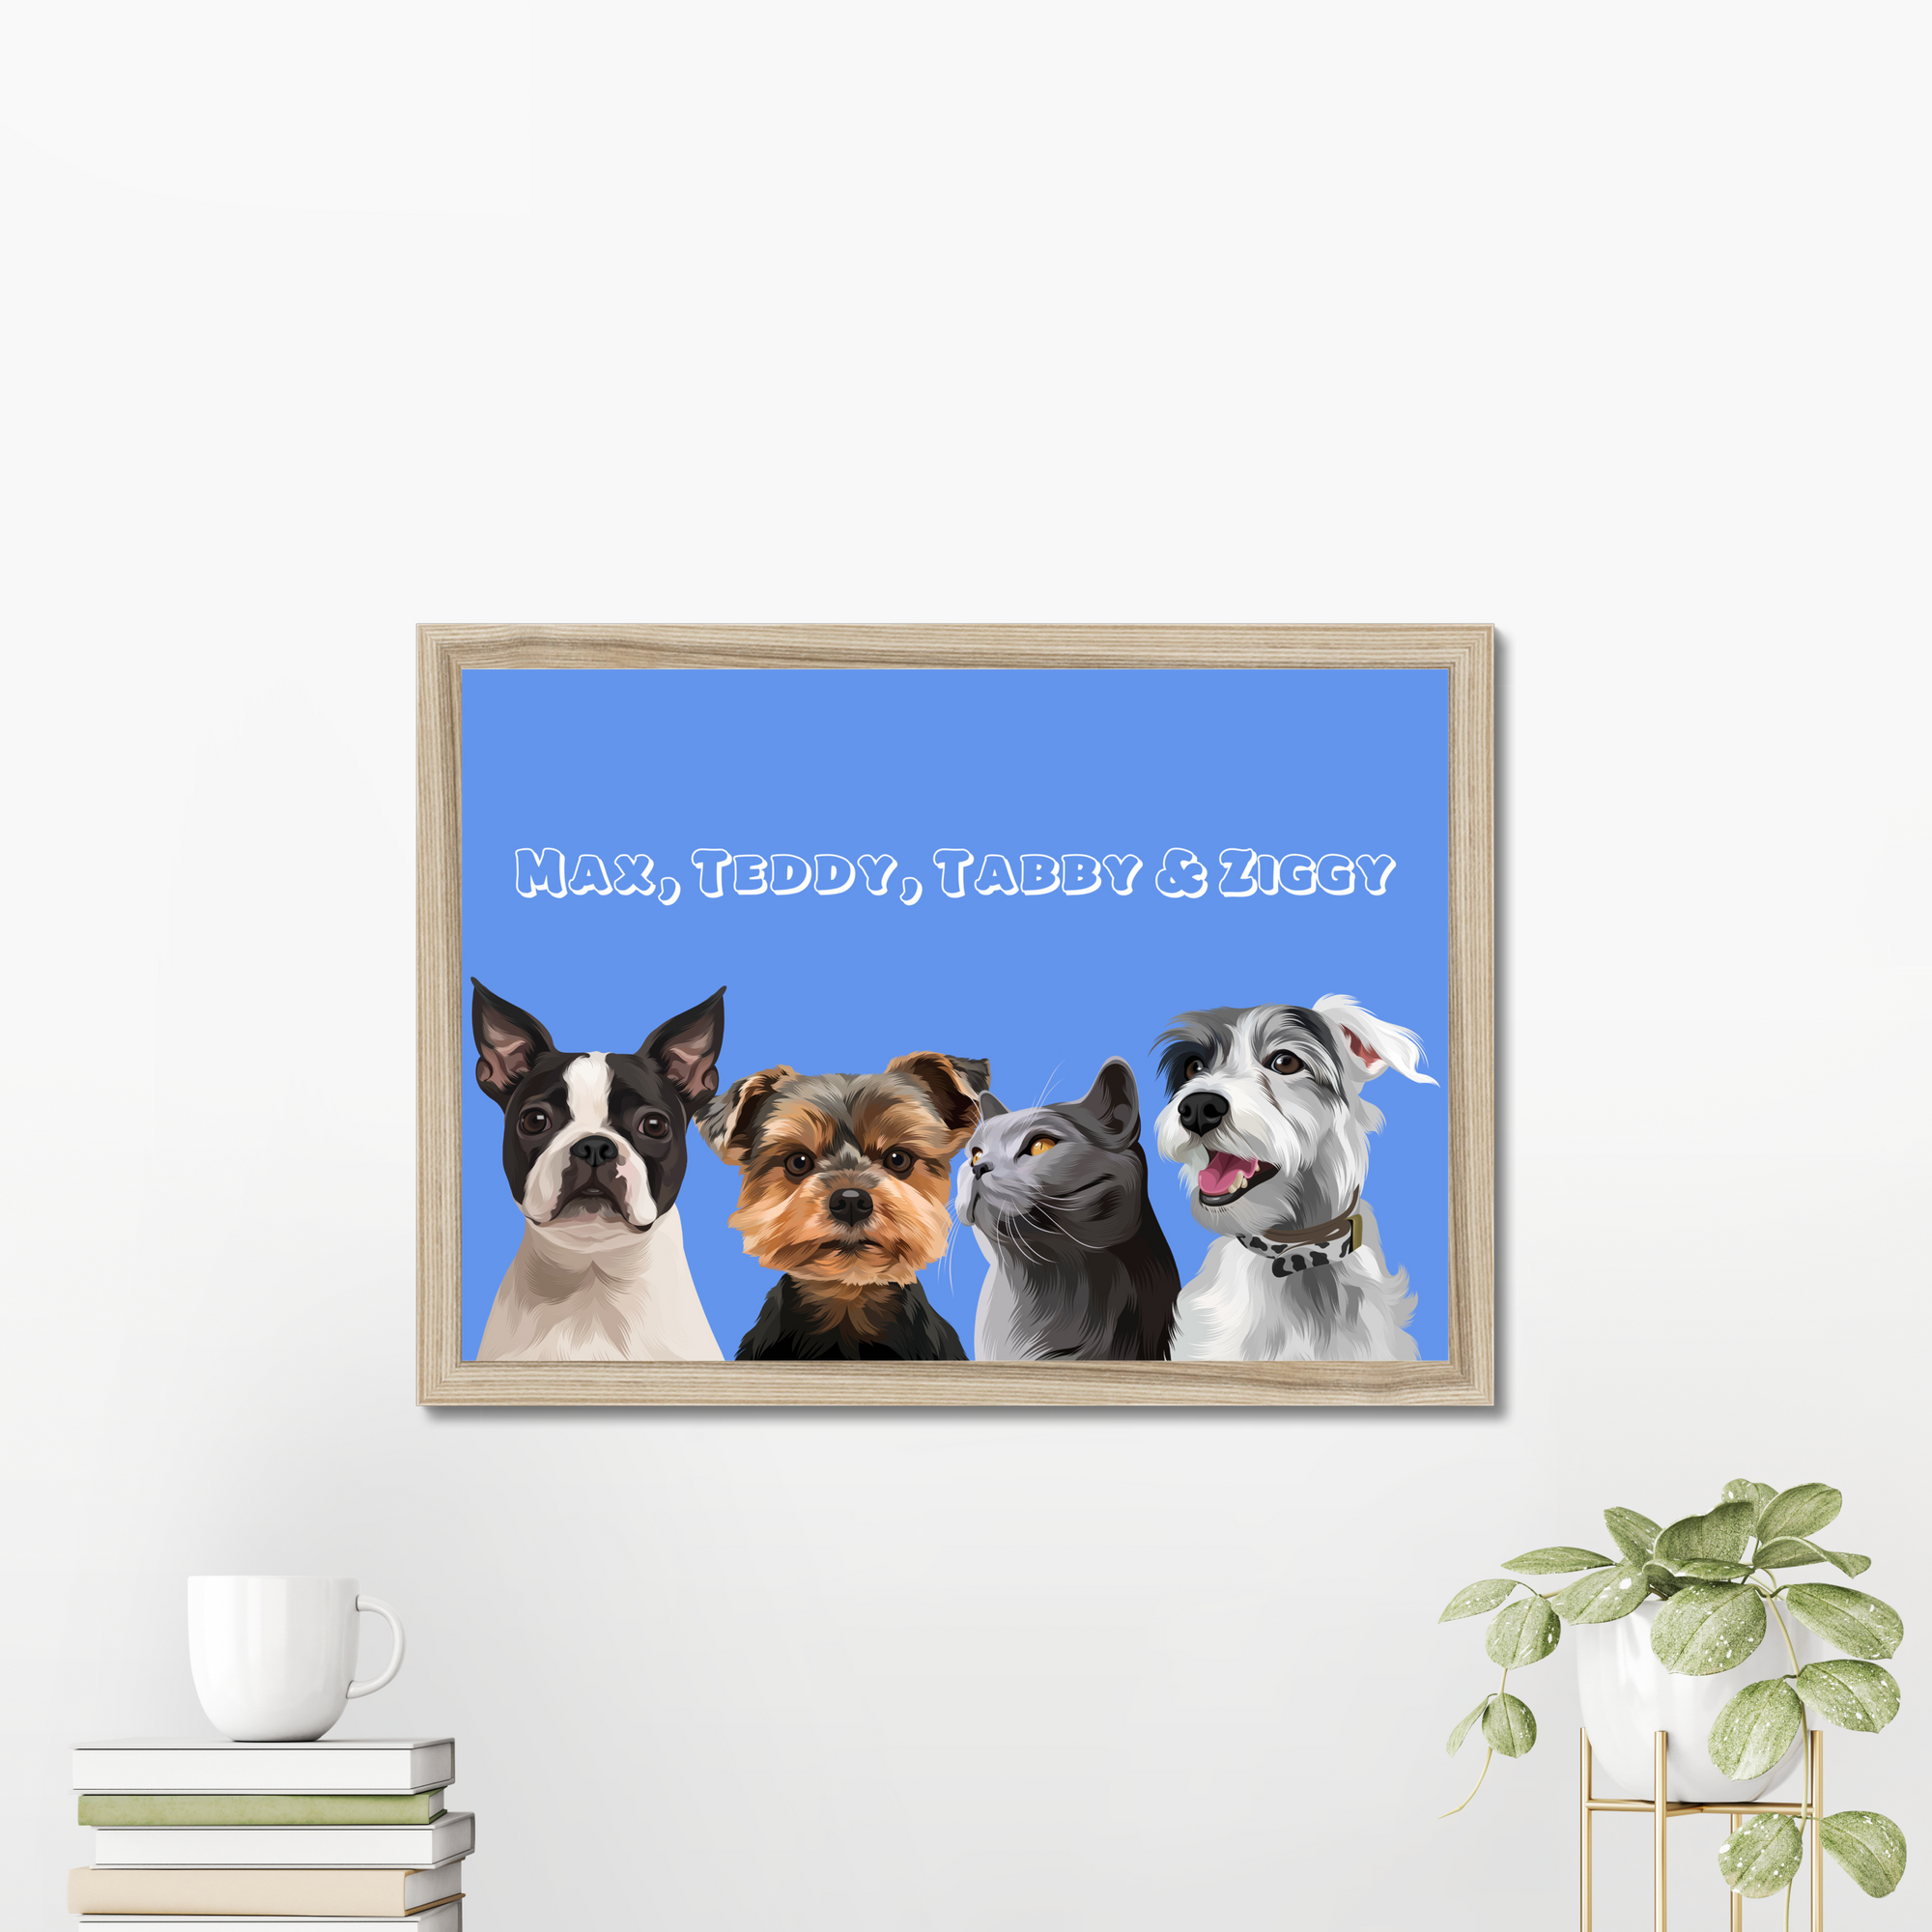 Modern: Custom Four Pet Portrait (Hald Body) - Paw & Glory, paw and glory, for pet portraits, painting of your dog, professional pet photos, best dog paintings, animal portrait pictures, hogwarts dog houses, pet portrait